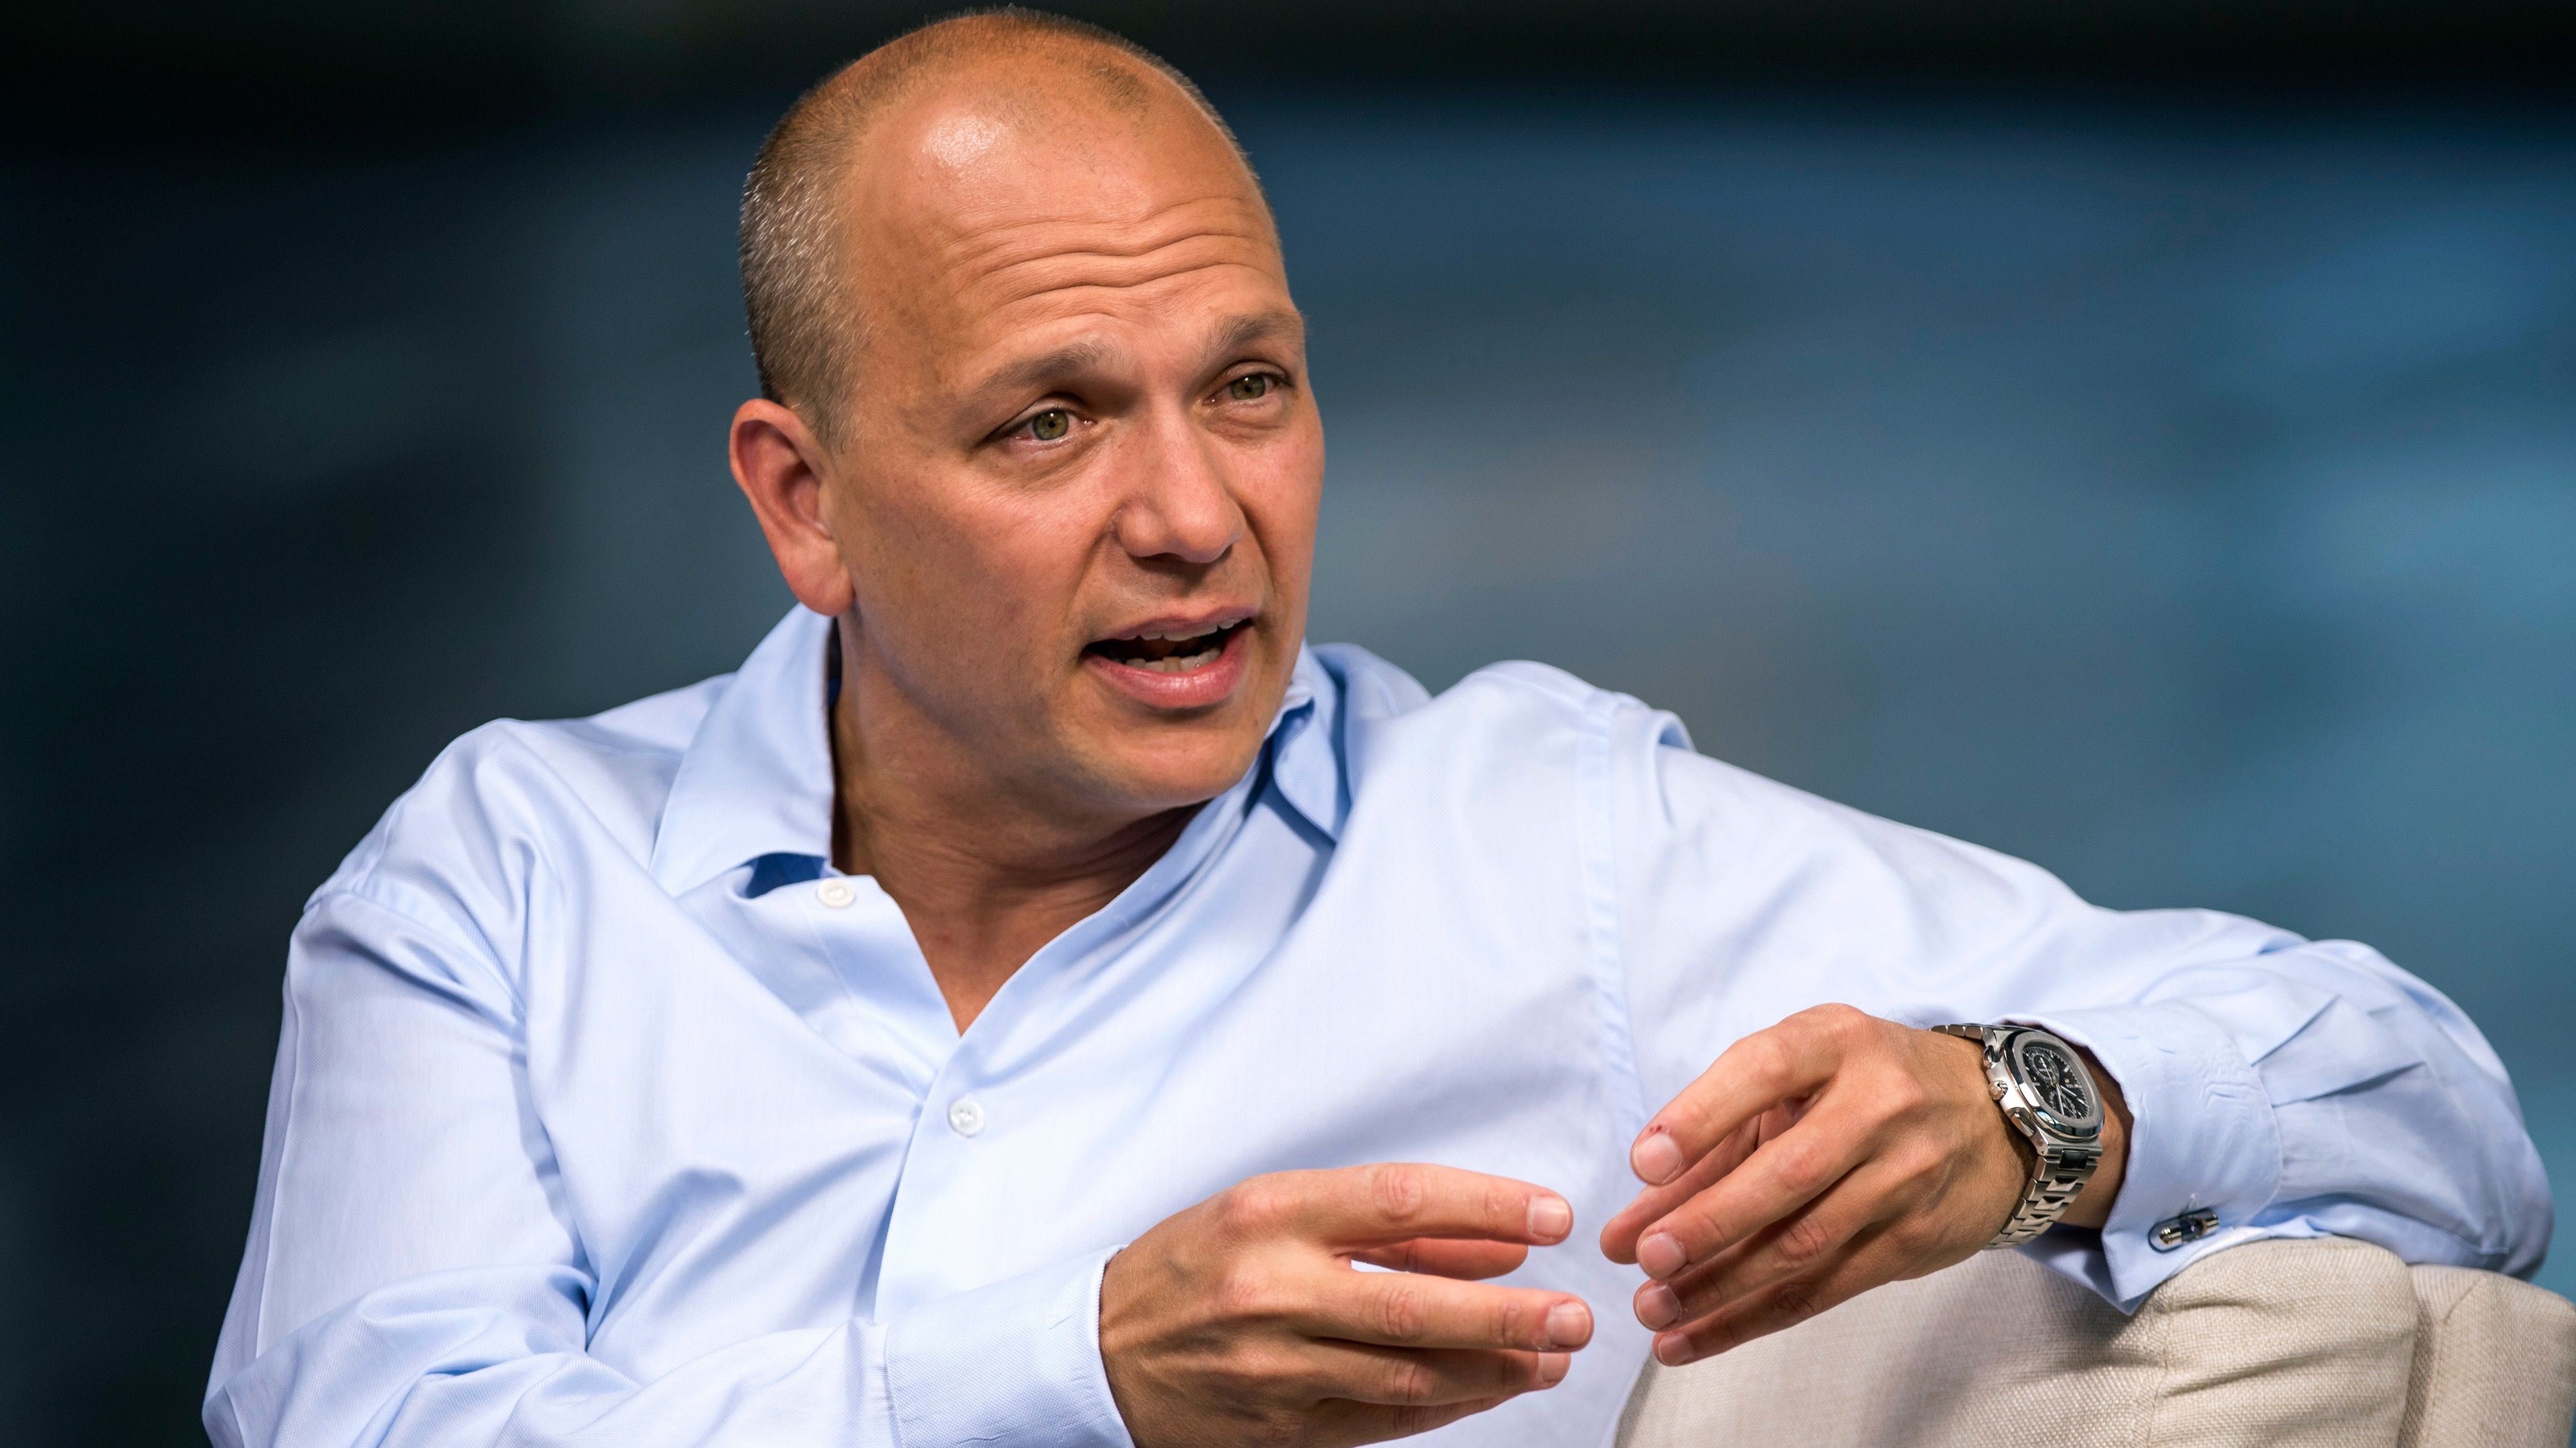 Tony Fadell, founder and chief executive officer of Nest Labs Inc., speaks during a Bloomberg Studio 1.0 interview in San Francisco, California, U.S., on Wednesday, July 29, 2015. Nest Labs Inc. designs and manufactures wifi enabled learning and programmable devices such as thermostats, smoke detectors and security cameras for the home. Photographer: David Paul Morris/Bloomberg  *** Local Caption *** Tony Fadell